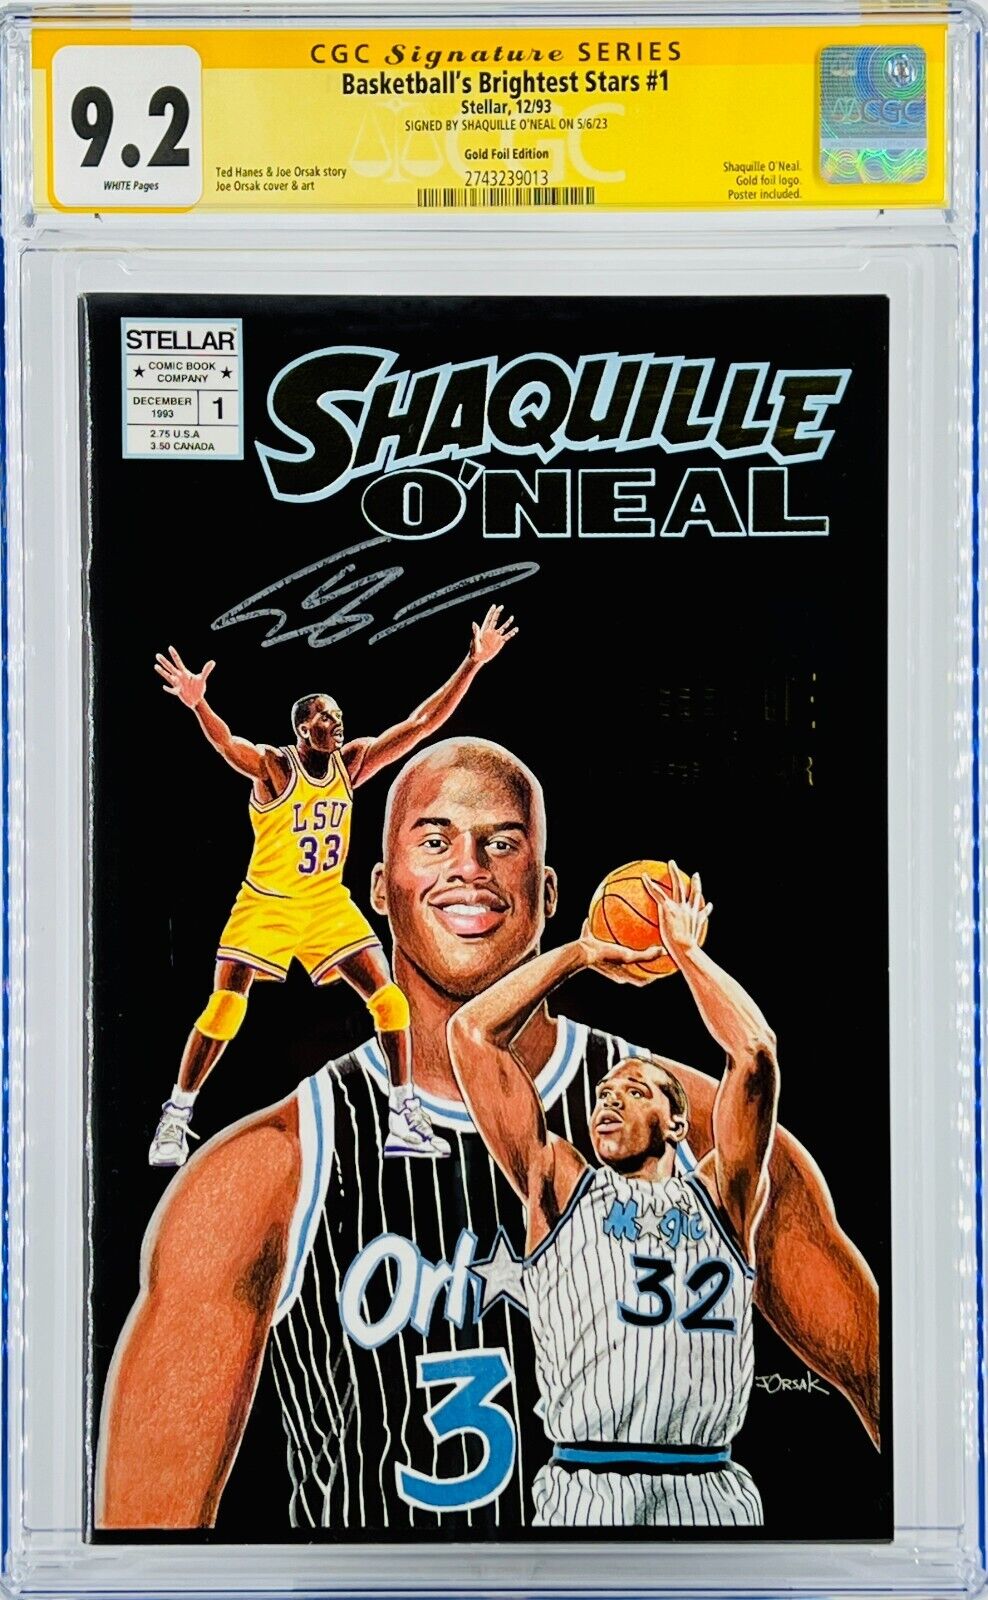 Shaquille O'Neal Signed CGC SS Basketball's Brightest Stars #1 Stellar Grade 9.2